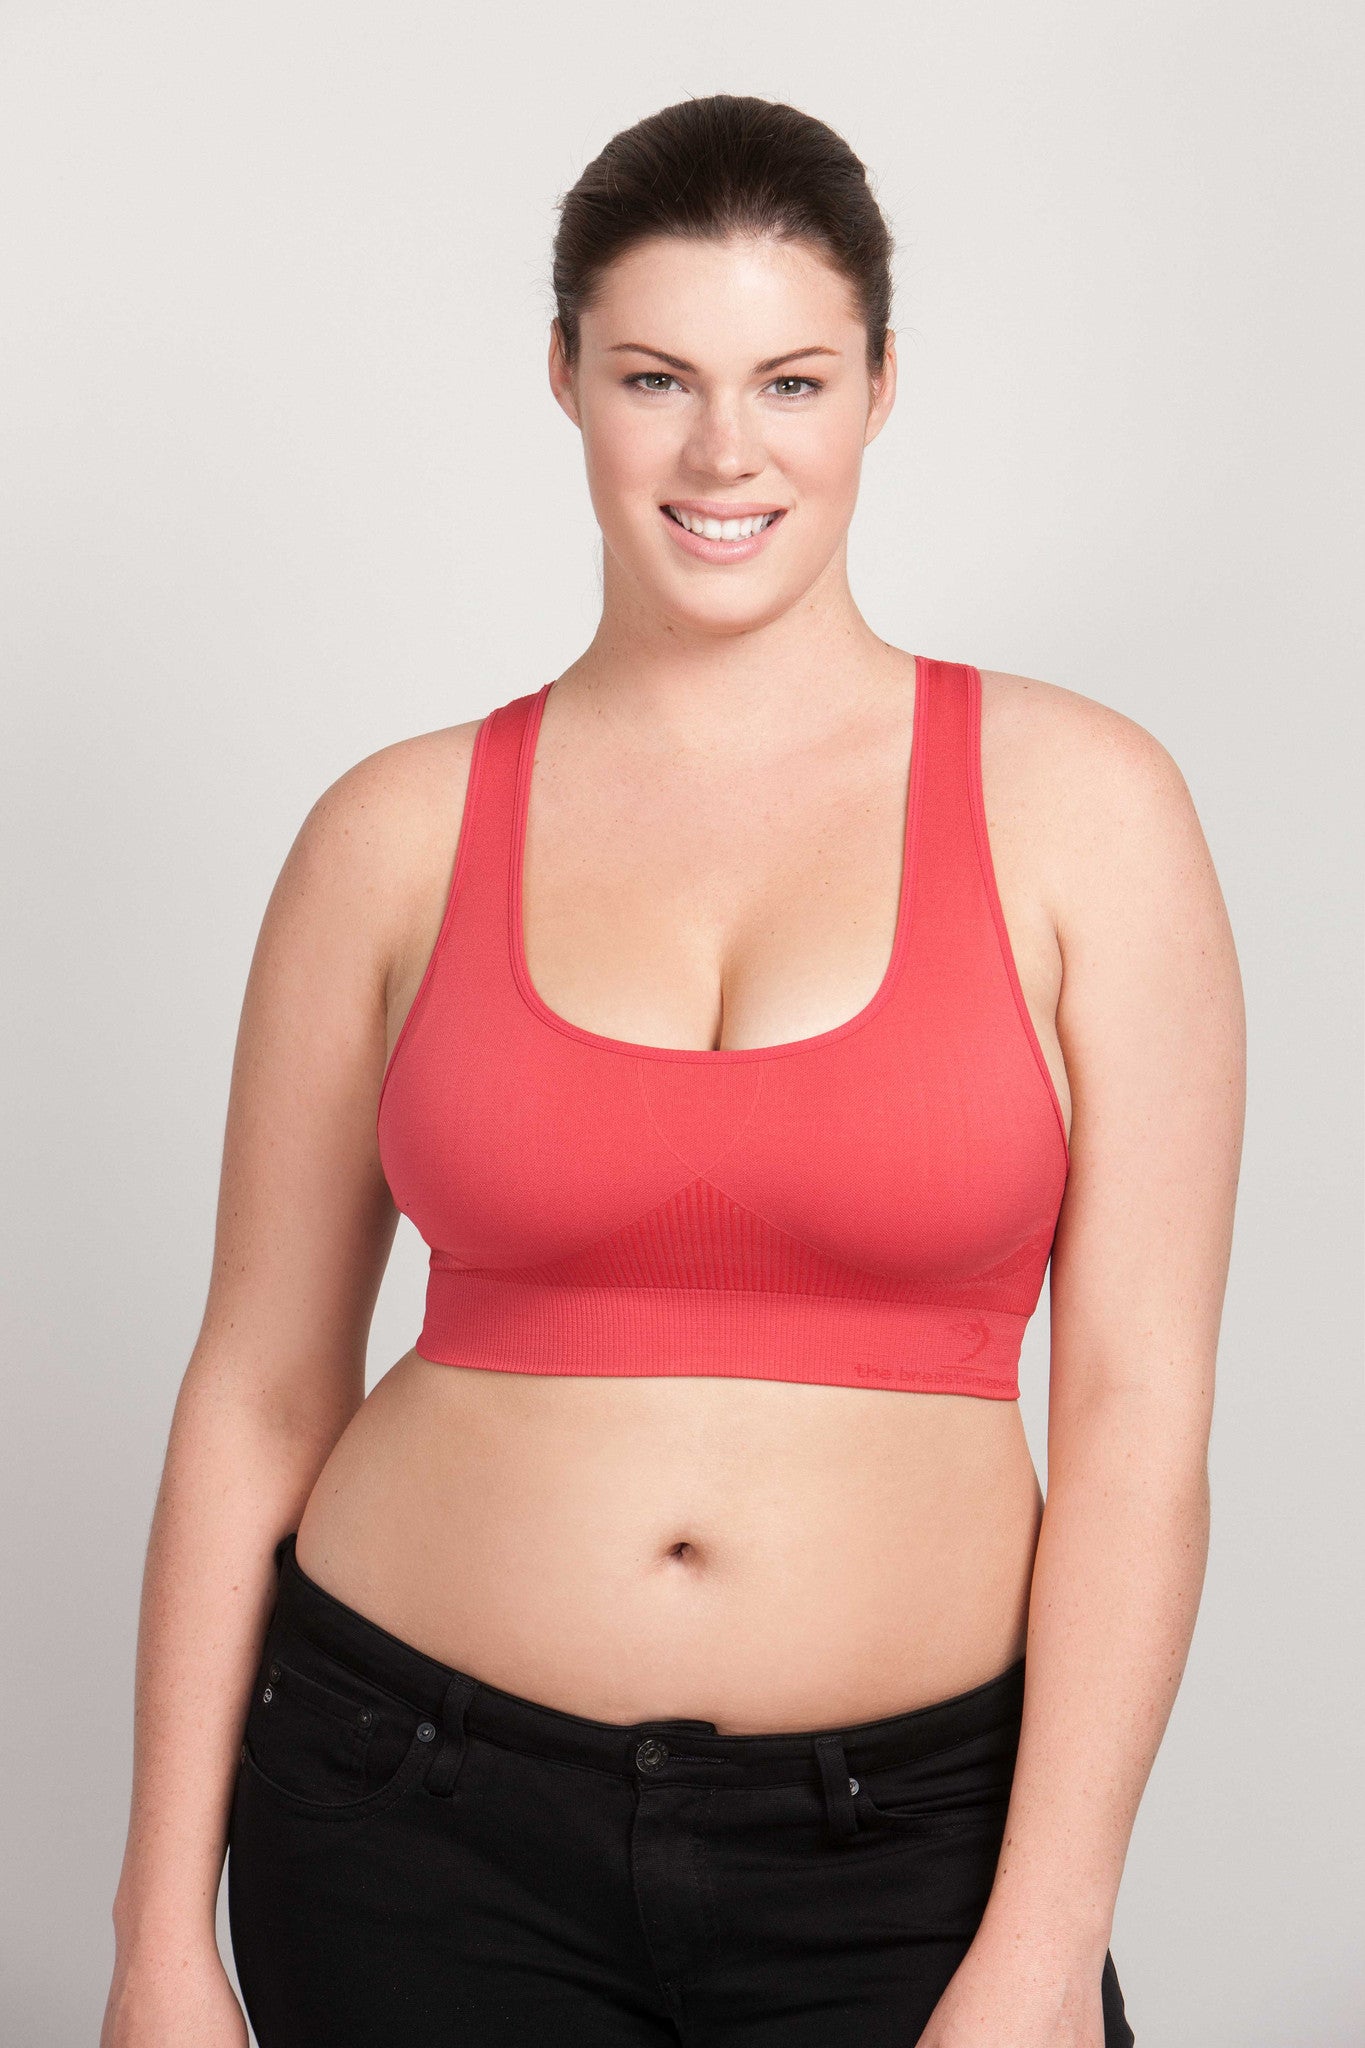 Breast Whisperer Bra for Natural Women in Coral Front